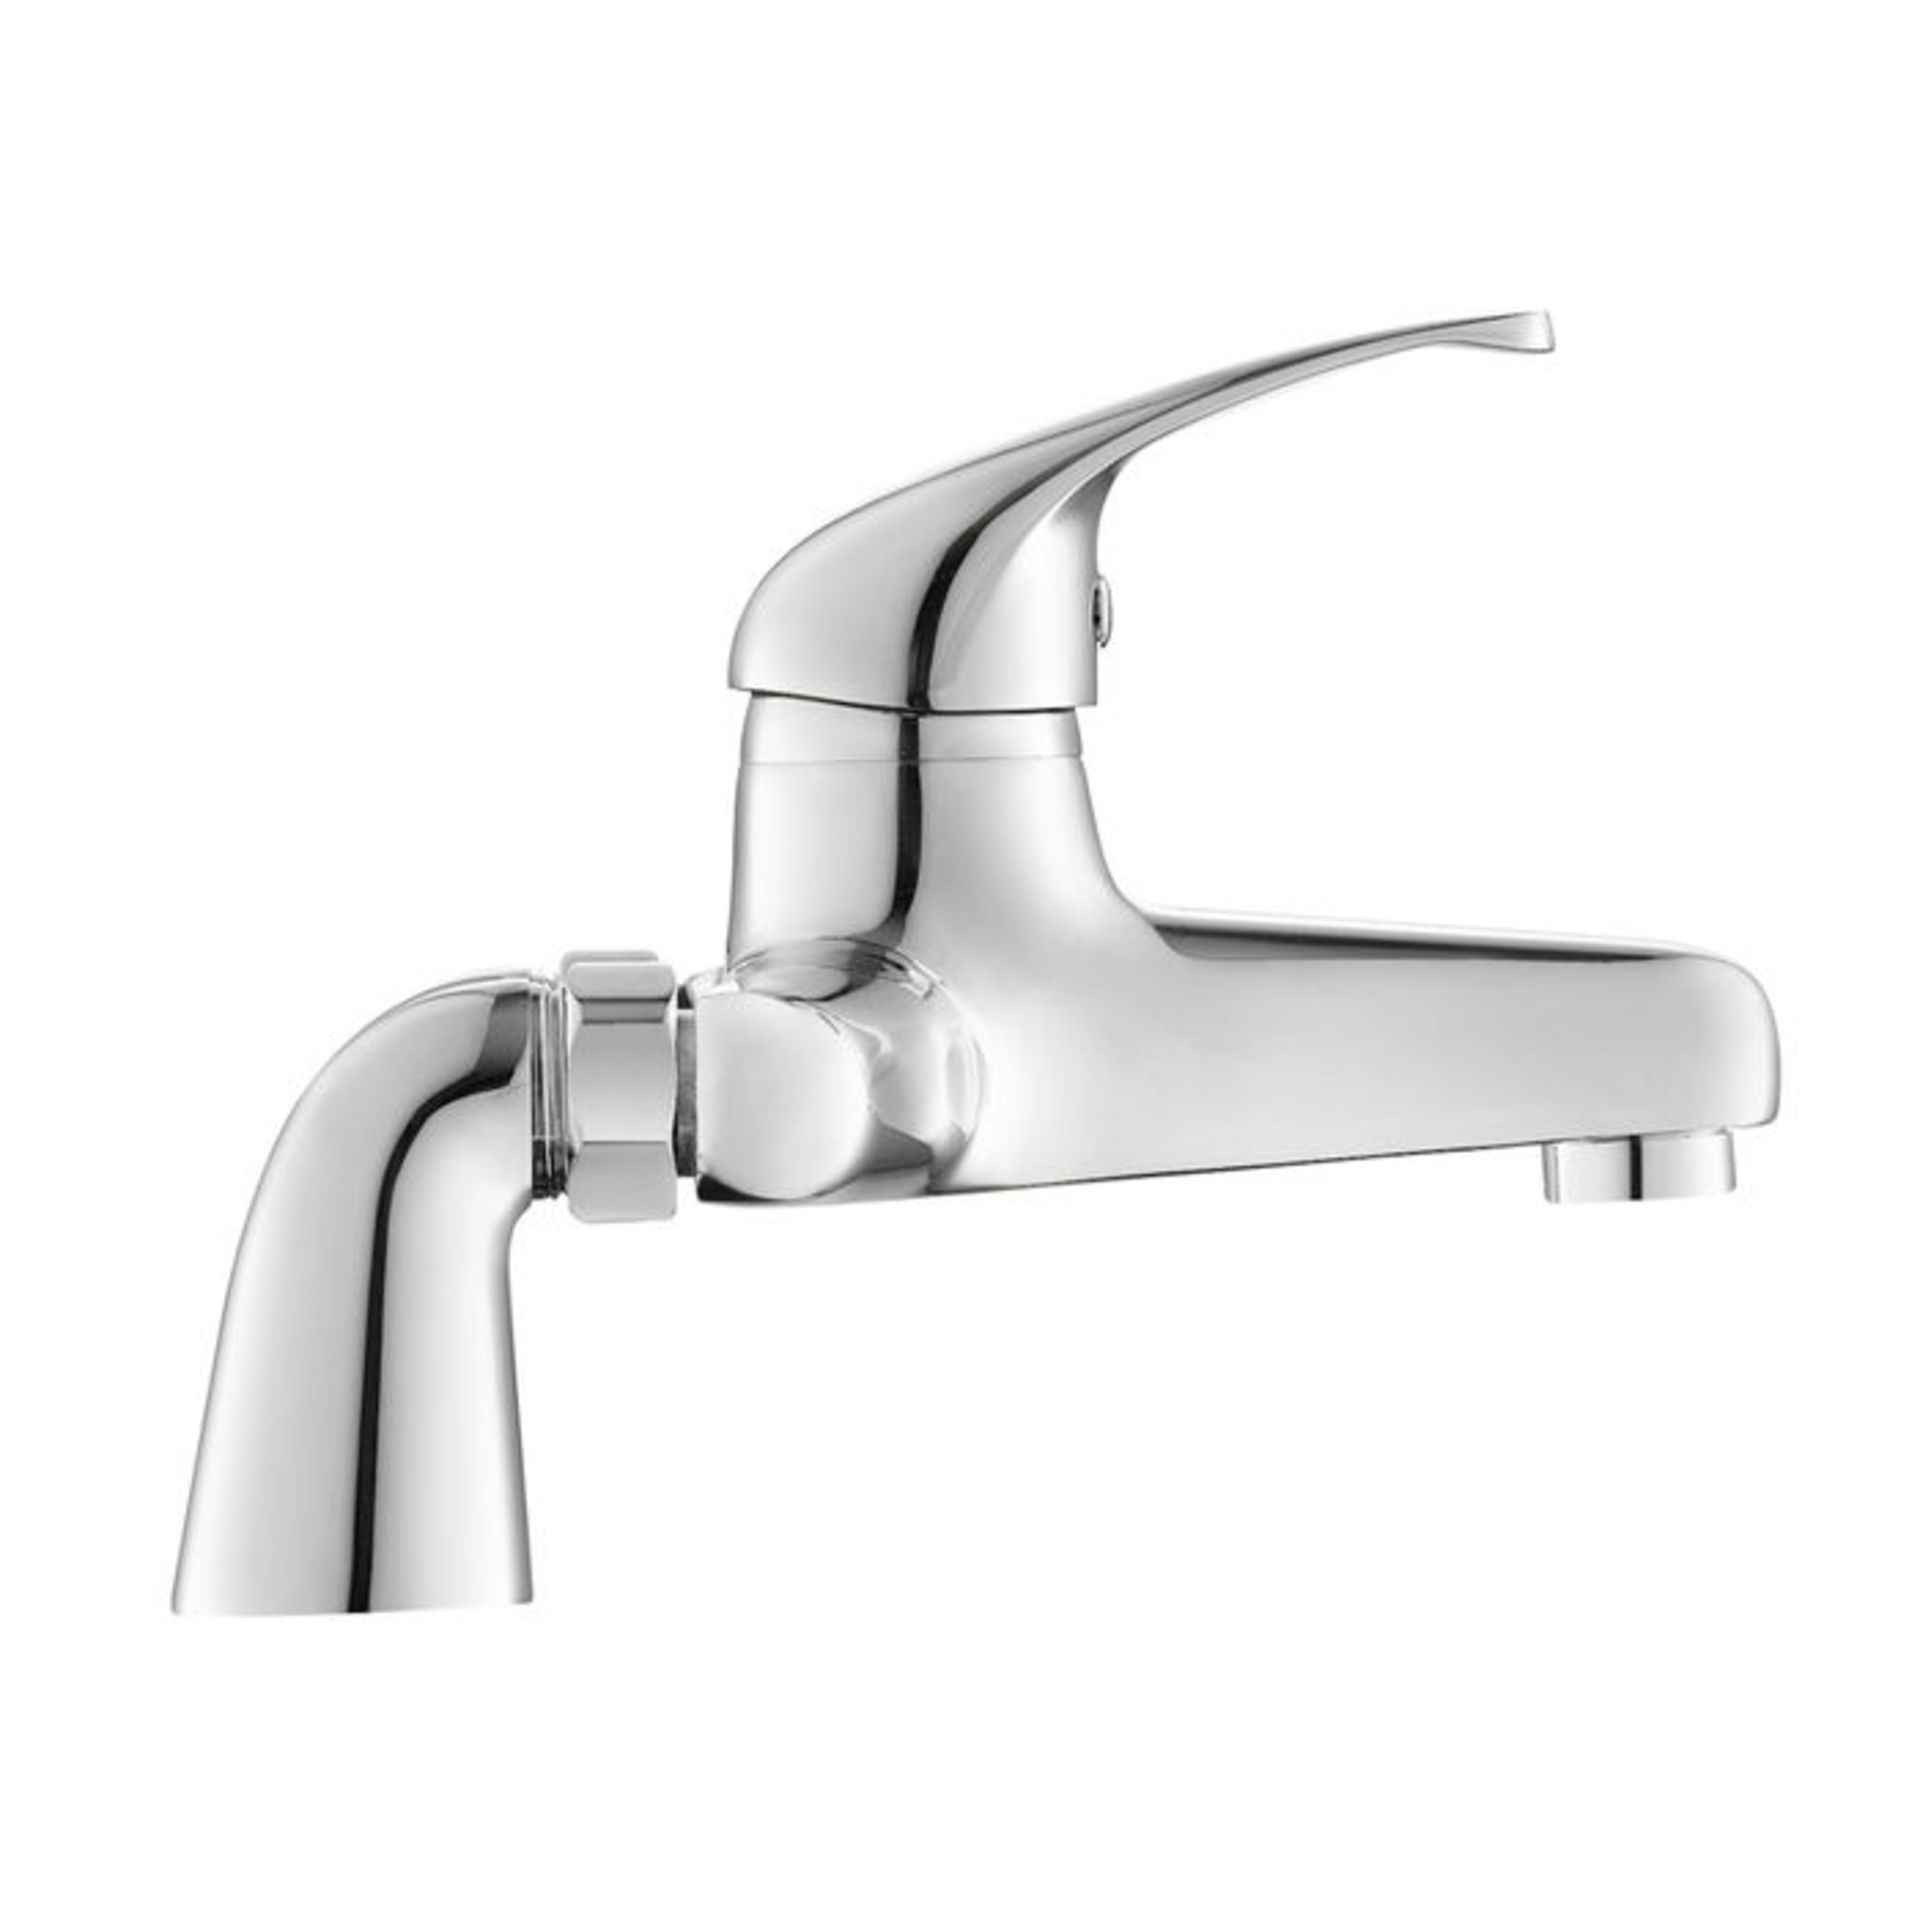 (LX7 ) Sleek Bath Filler Mixer Tap Chrome Plated Solid Brass 1/4 turn solid brass valve with ceramic - Image 2 of 3